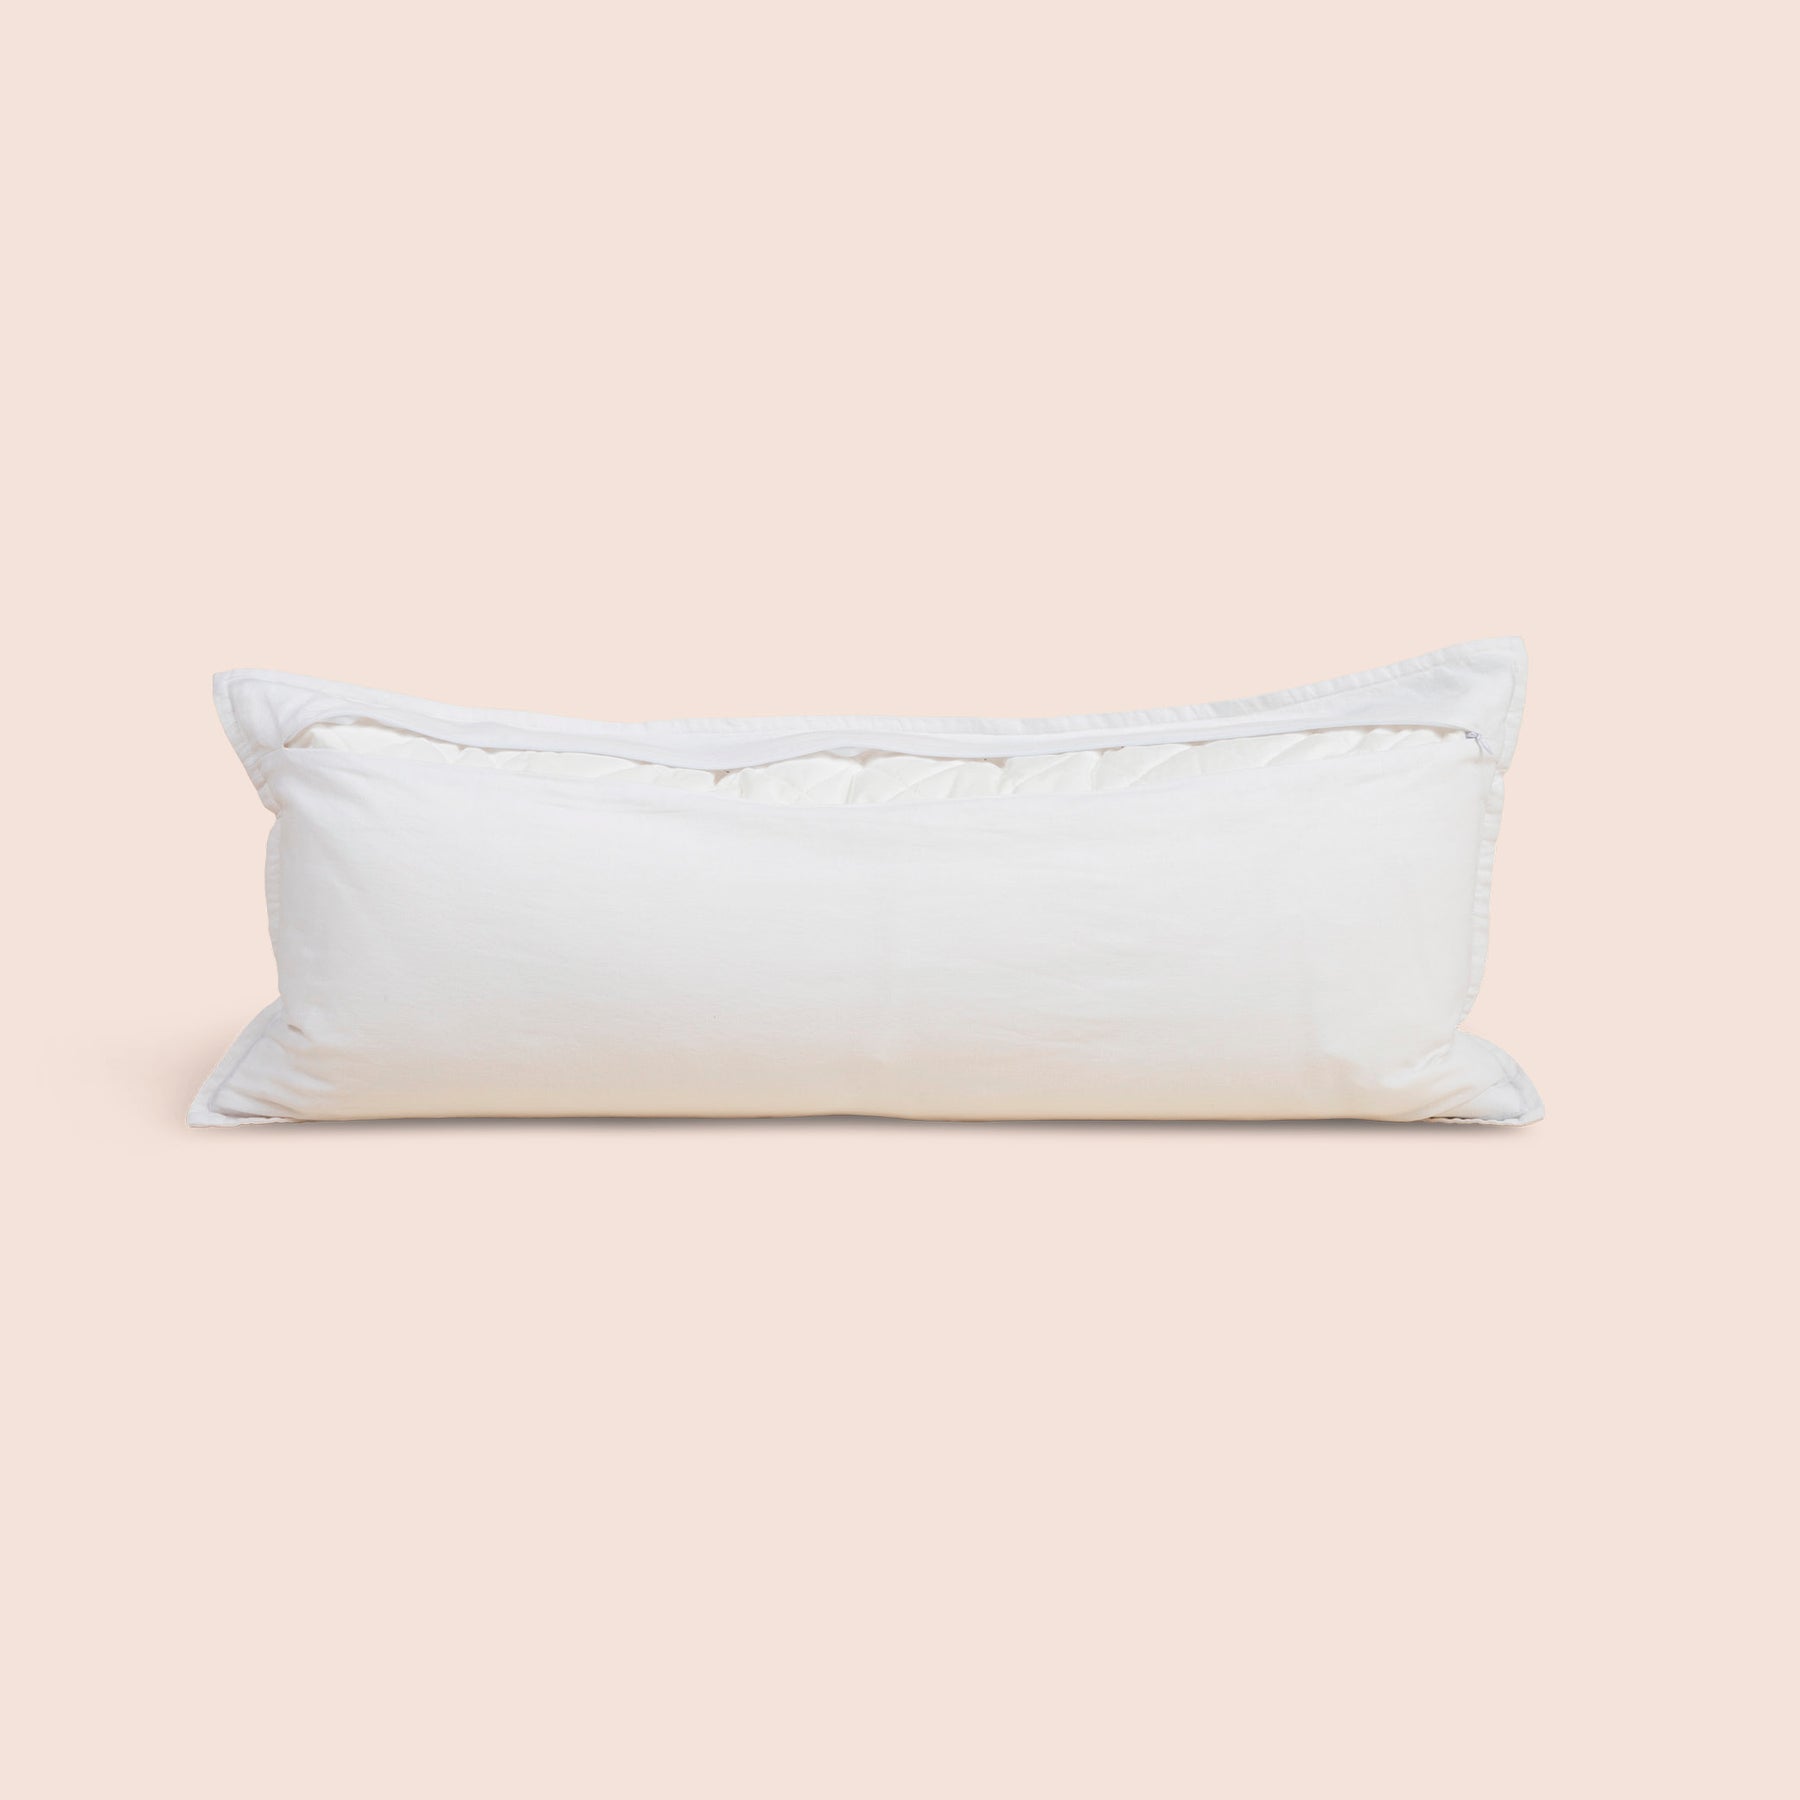 Image of the back of the White Relaxed Hemp Lumbar Pillow Cover on a lumbar pillow with the back zipper open on a light pink background